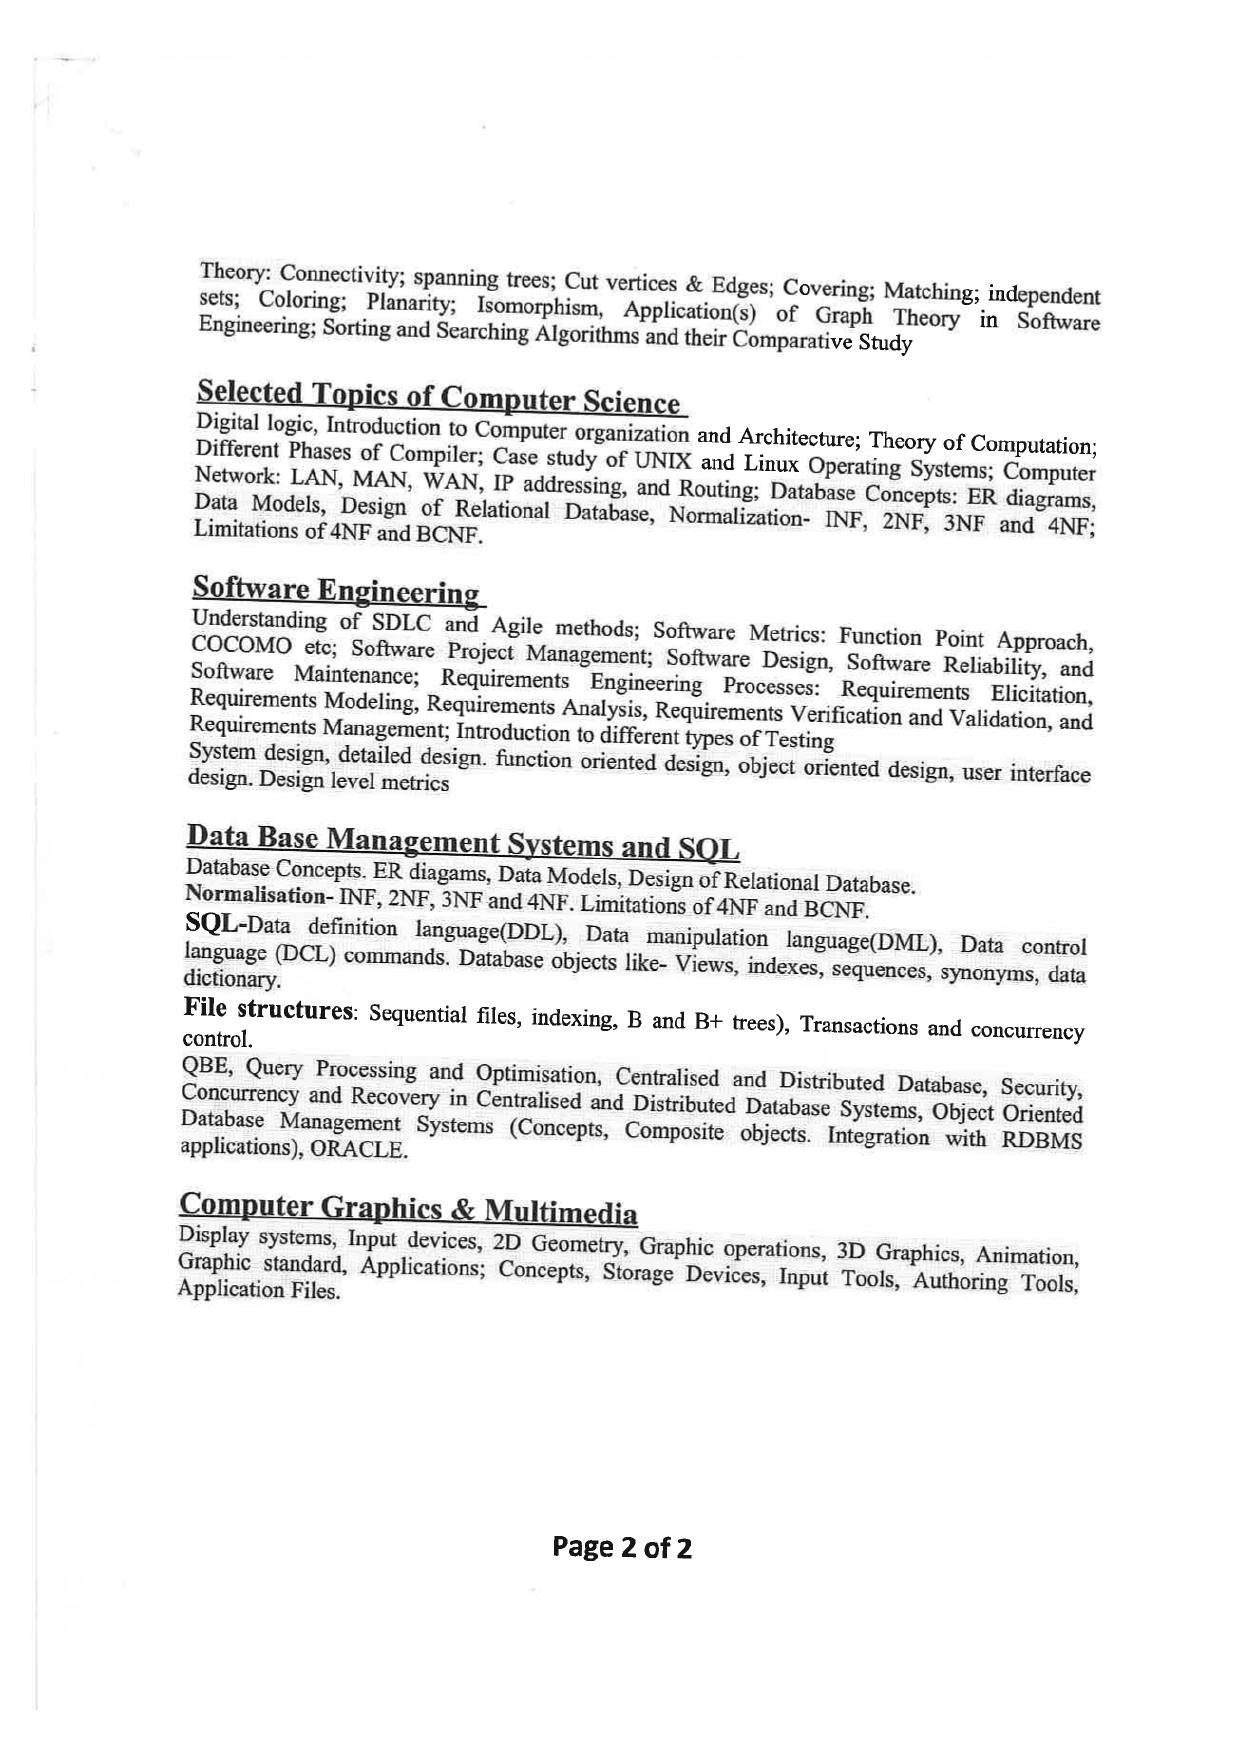 JMI Entrance Exam FACULTY OF ENGINEERING & TECHNOLOGY Syllabus - Page 15